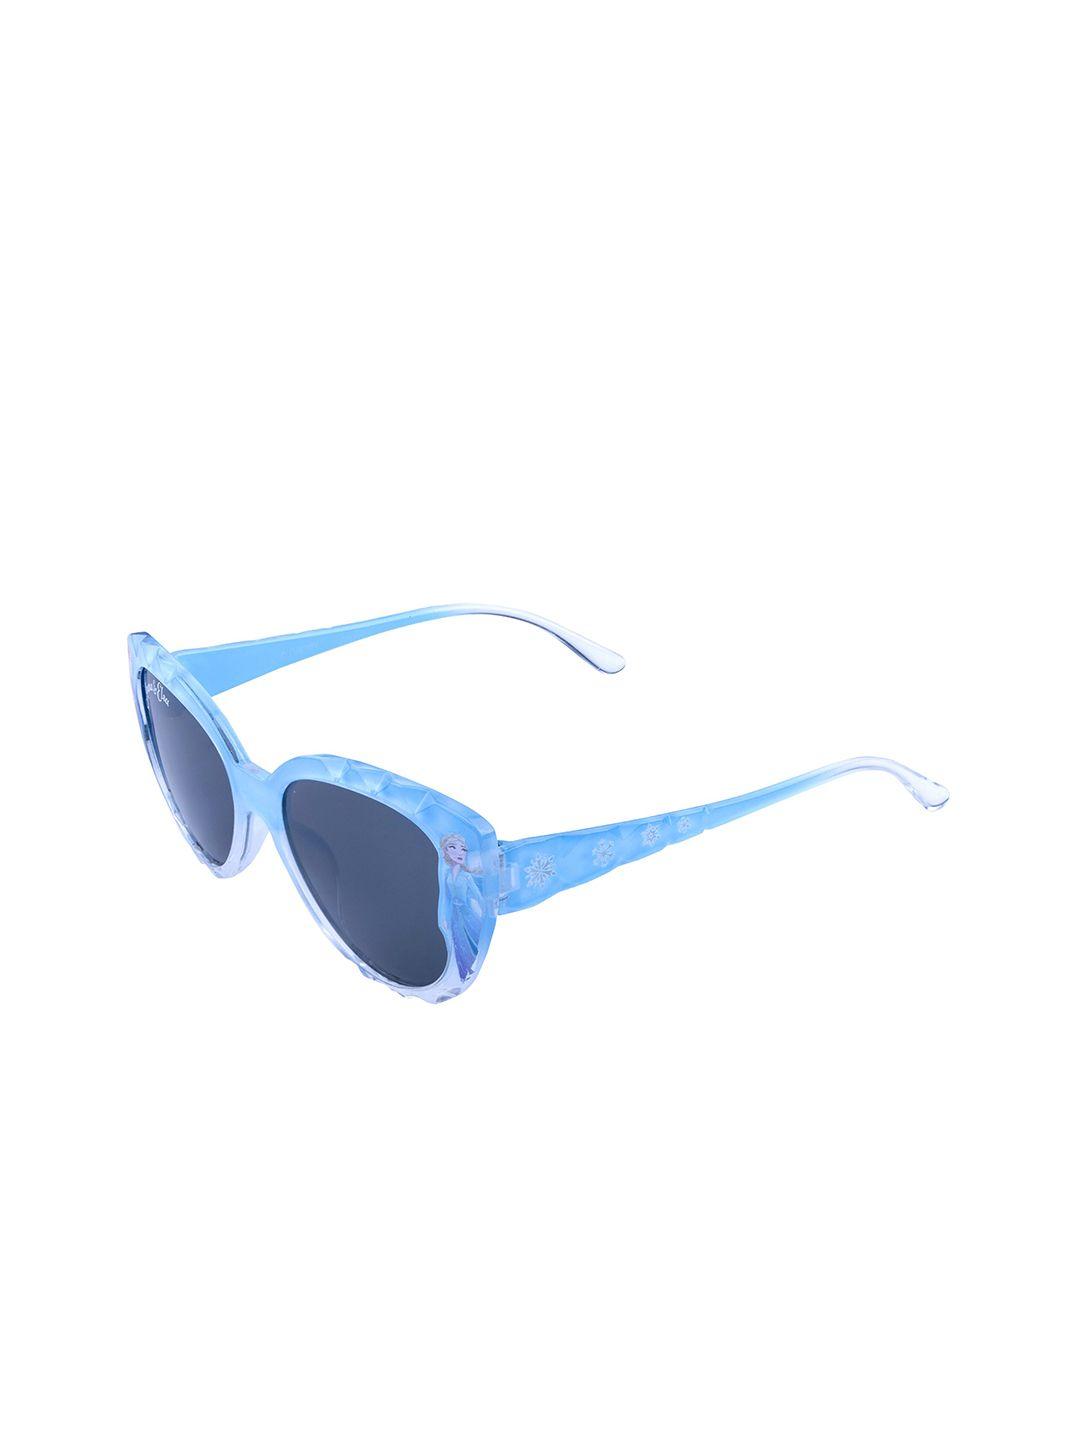 disney girls grey lens & blue butterfly sunglasses with uv protected lens trha15235